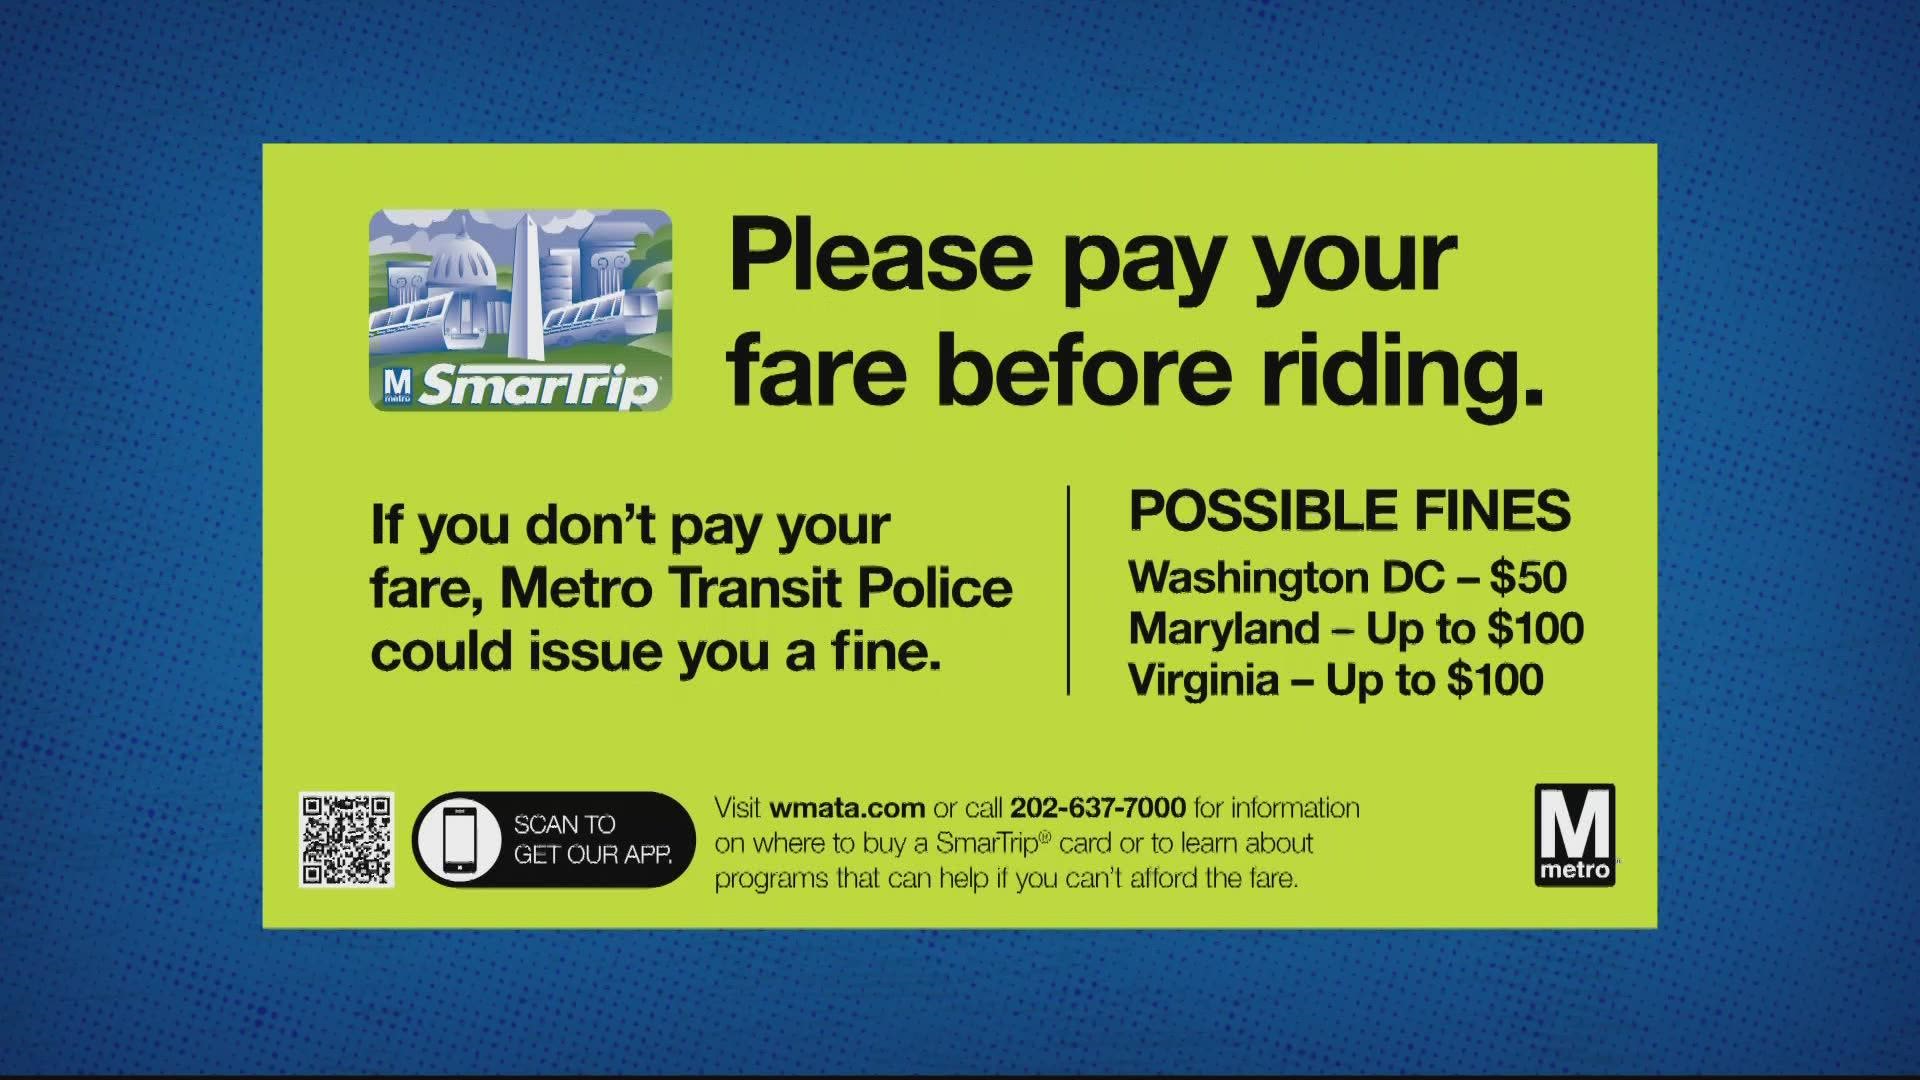 Metro has begun displaying signs warning of the consequences of fare evasion. In November, they will start issuing tickets